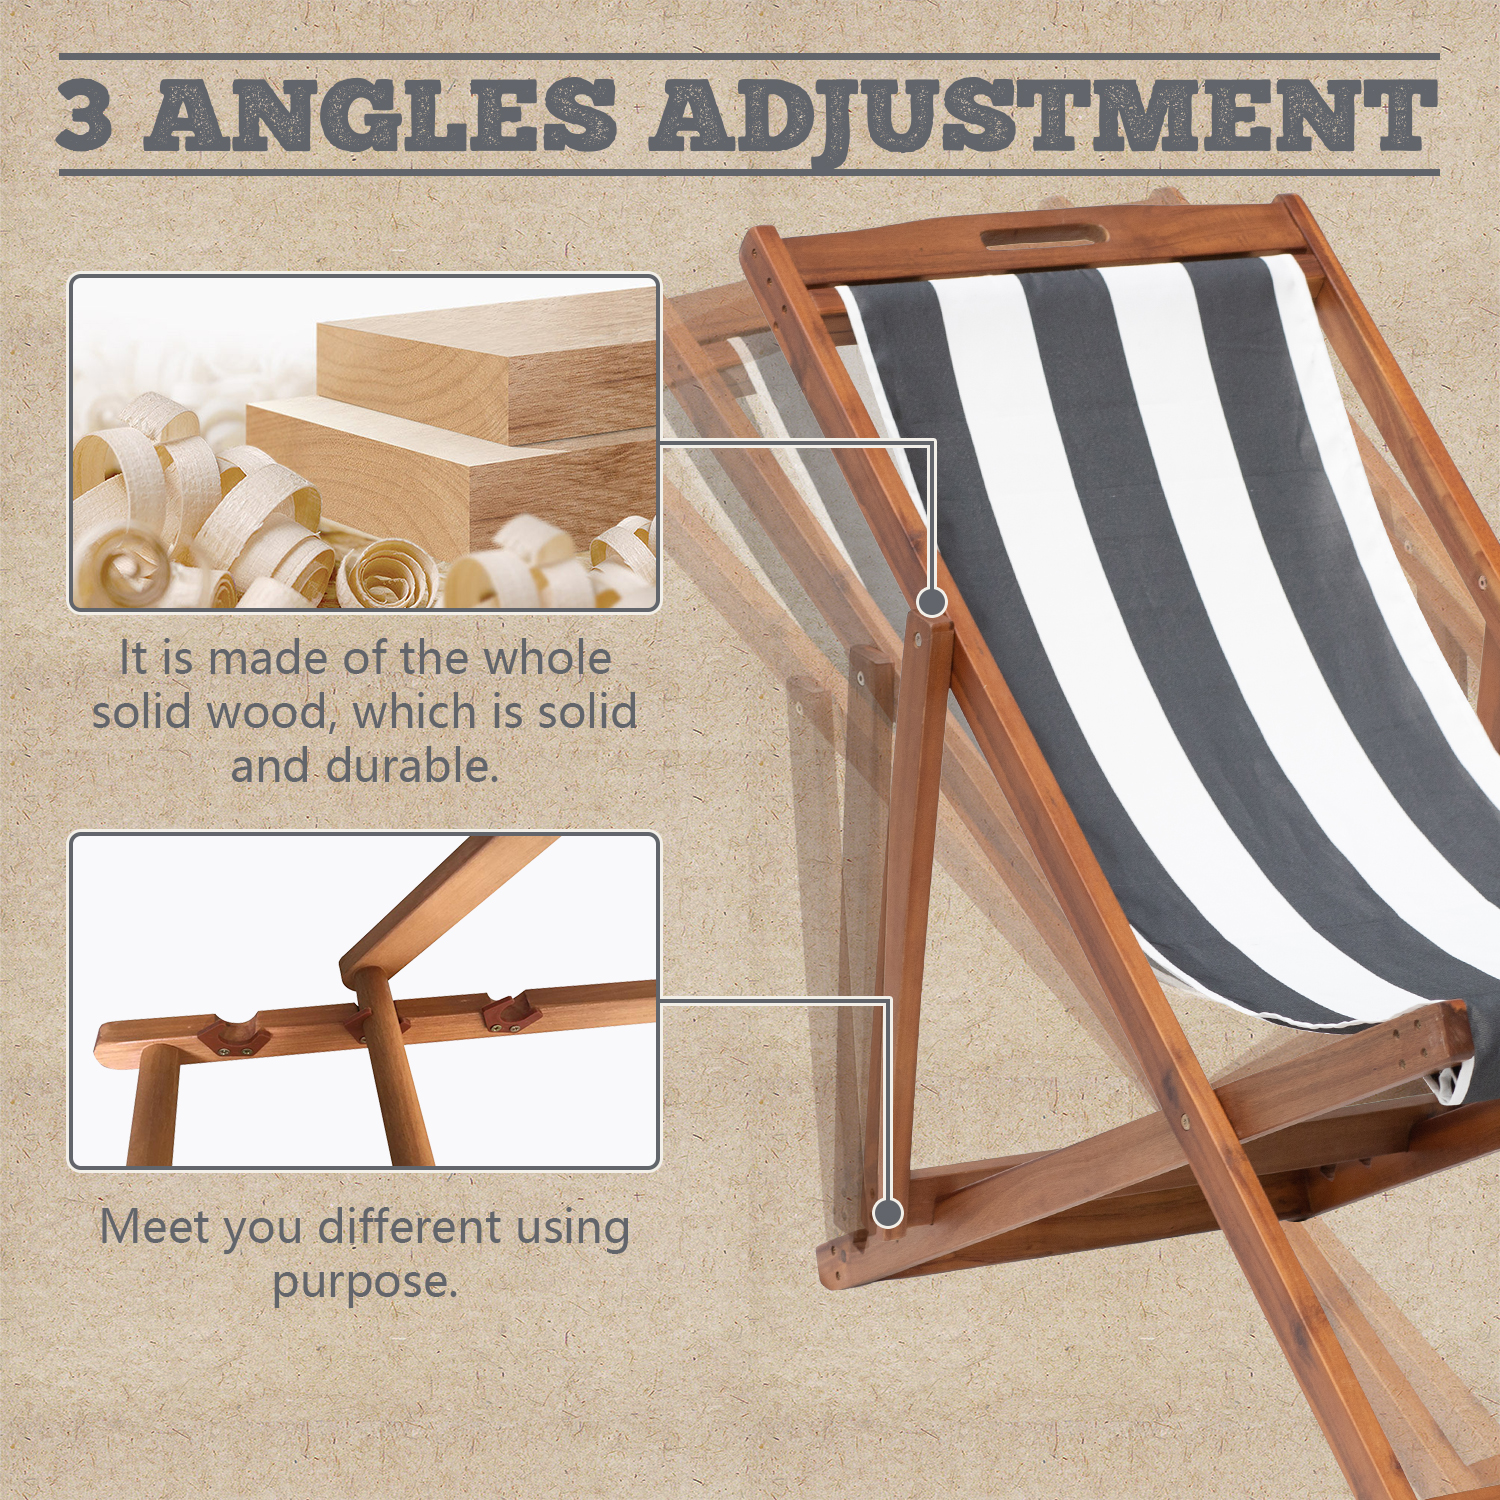 Beach Sling Chair Set of 2,  Adjustable Reclining Beach Chair  Outdoor Foldable Lounge Chairs for Garden, Backyard, Poolside, Balcony - image 4 of 7